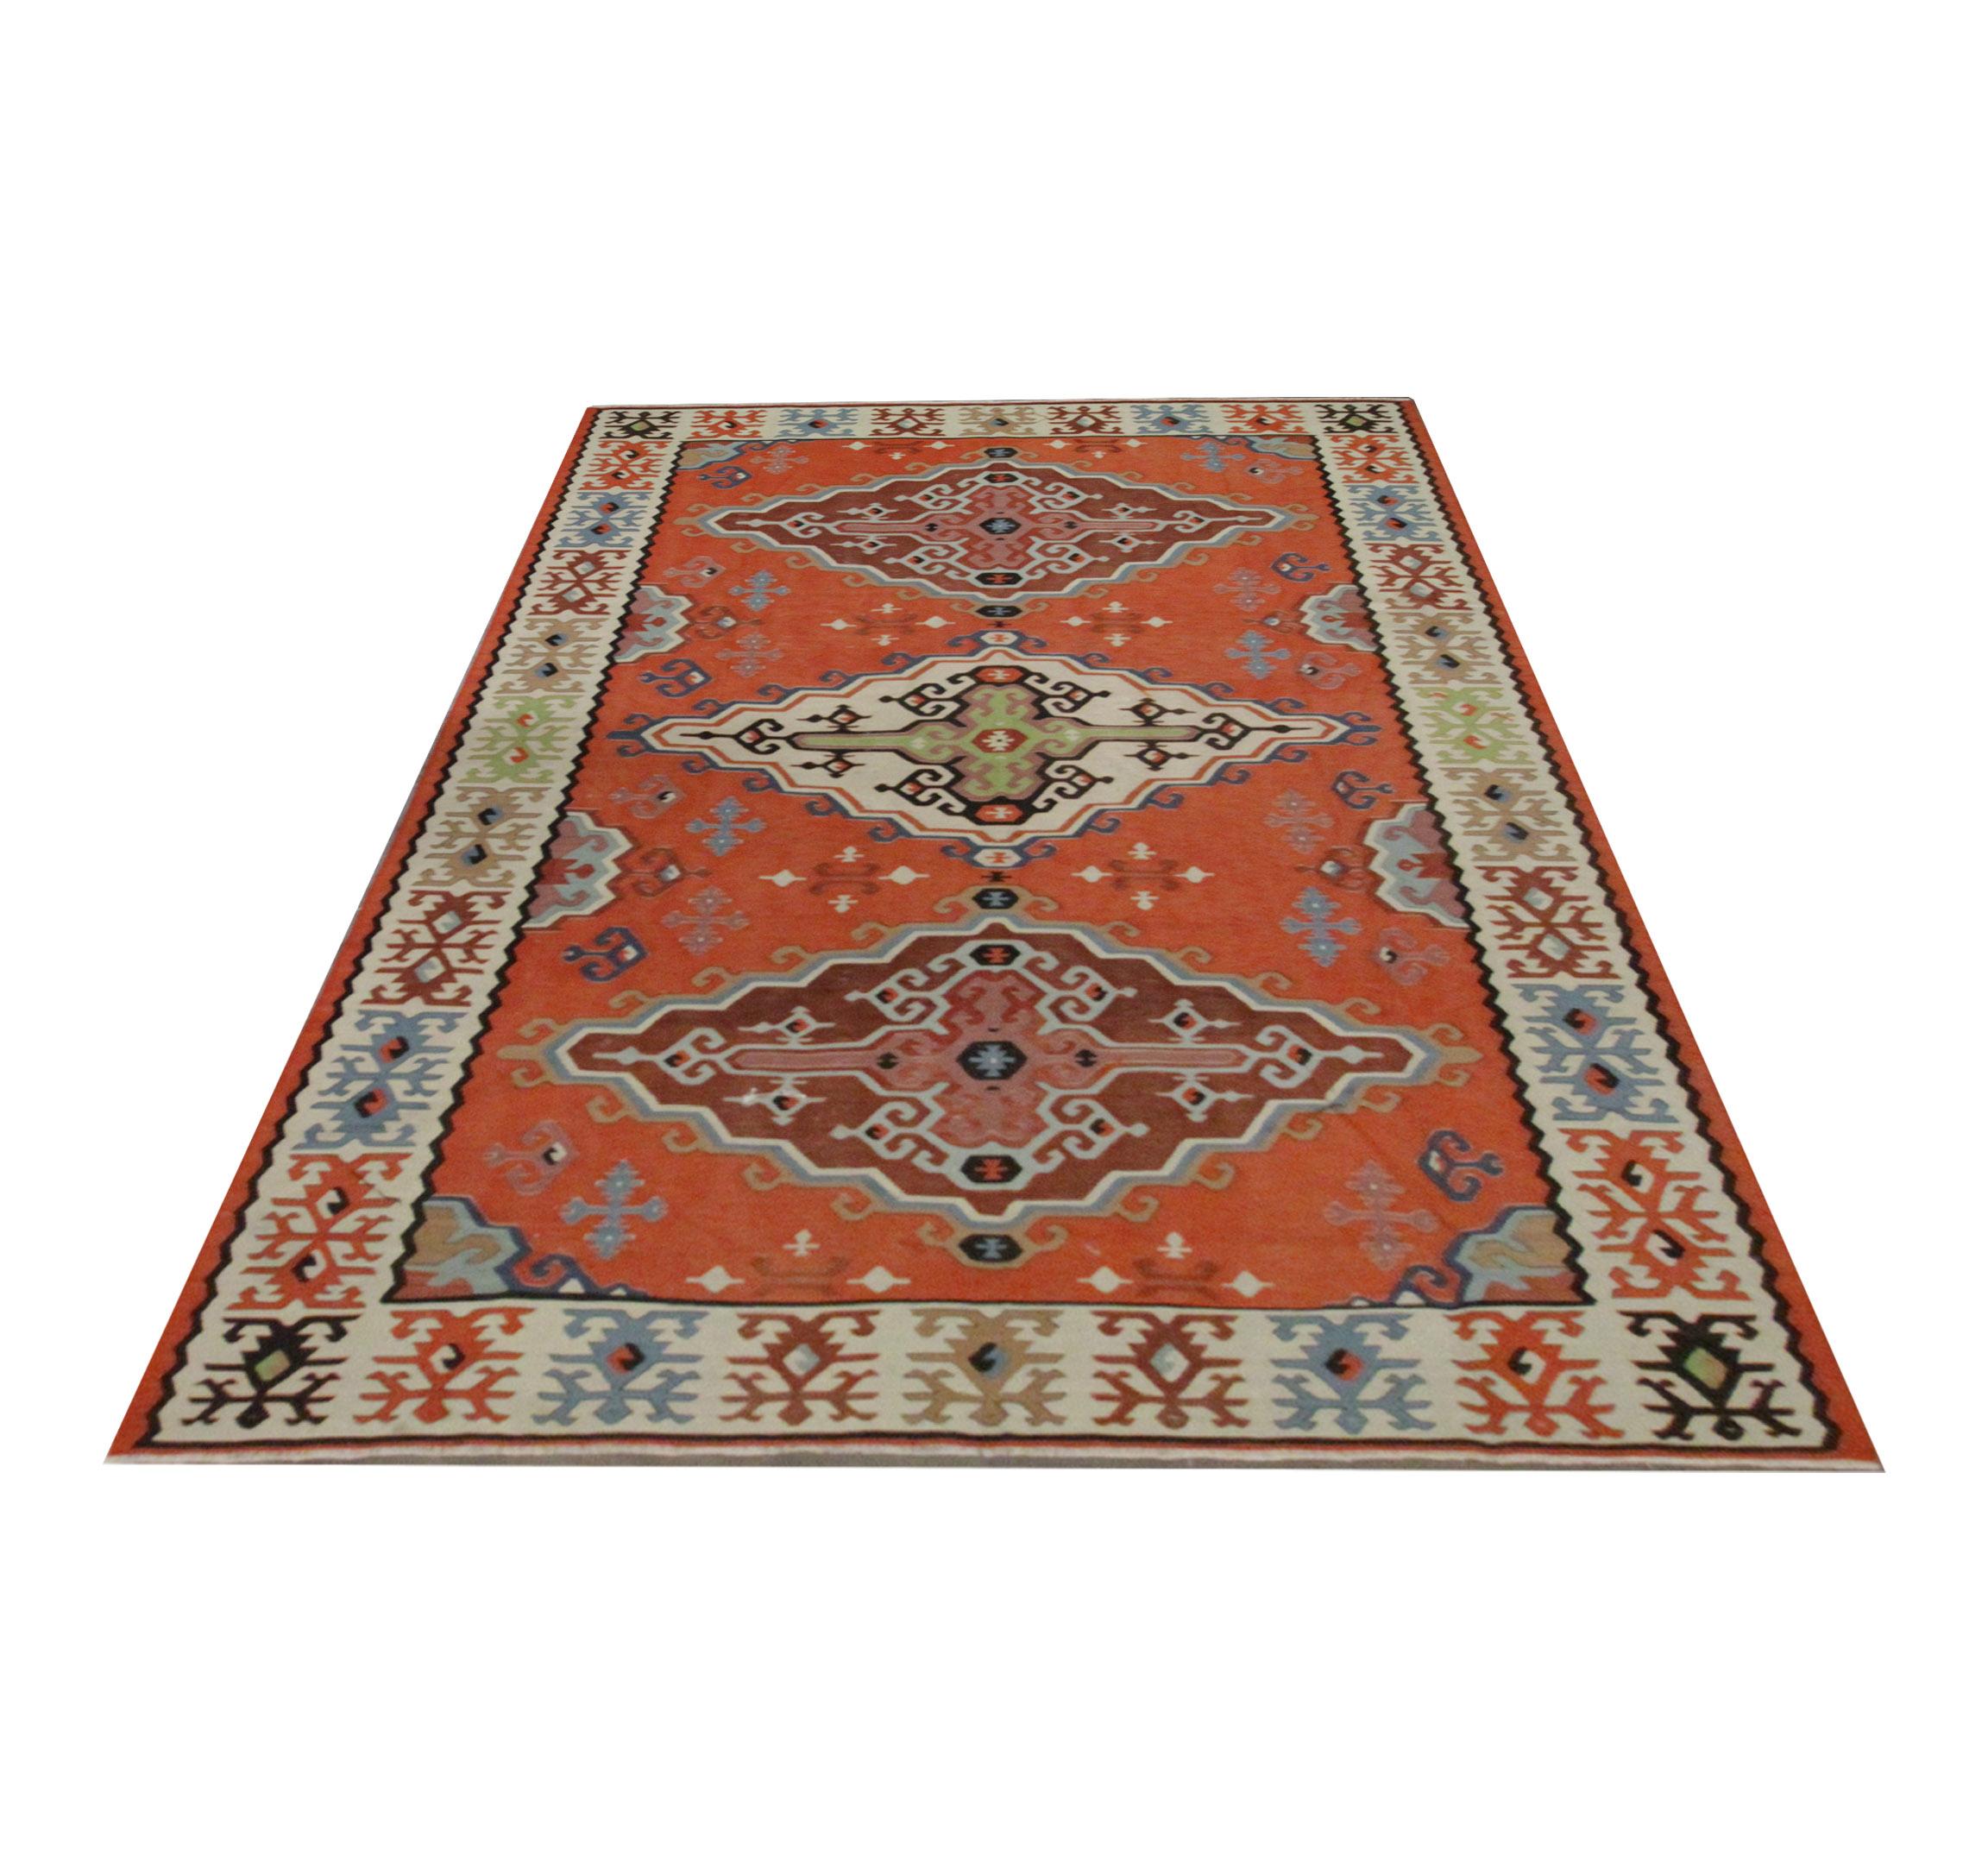 This beautiful handmade kilim is a Serbian, Pirot rug woven in the 1930s. The design features a rich rust background with a trio of medallions in cream, brown and pink accents. This has then been framed by a cream border with a repeating motif